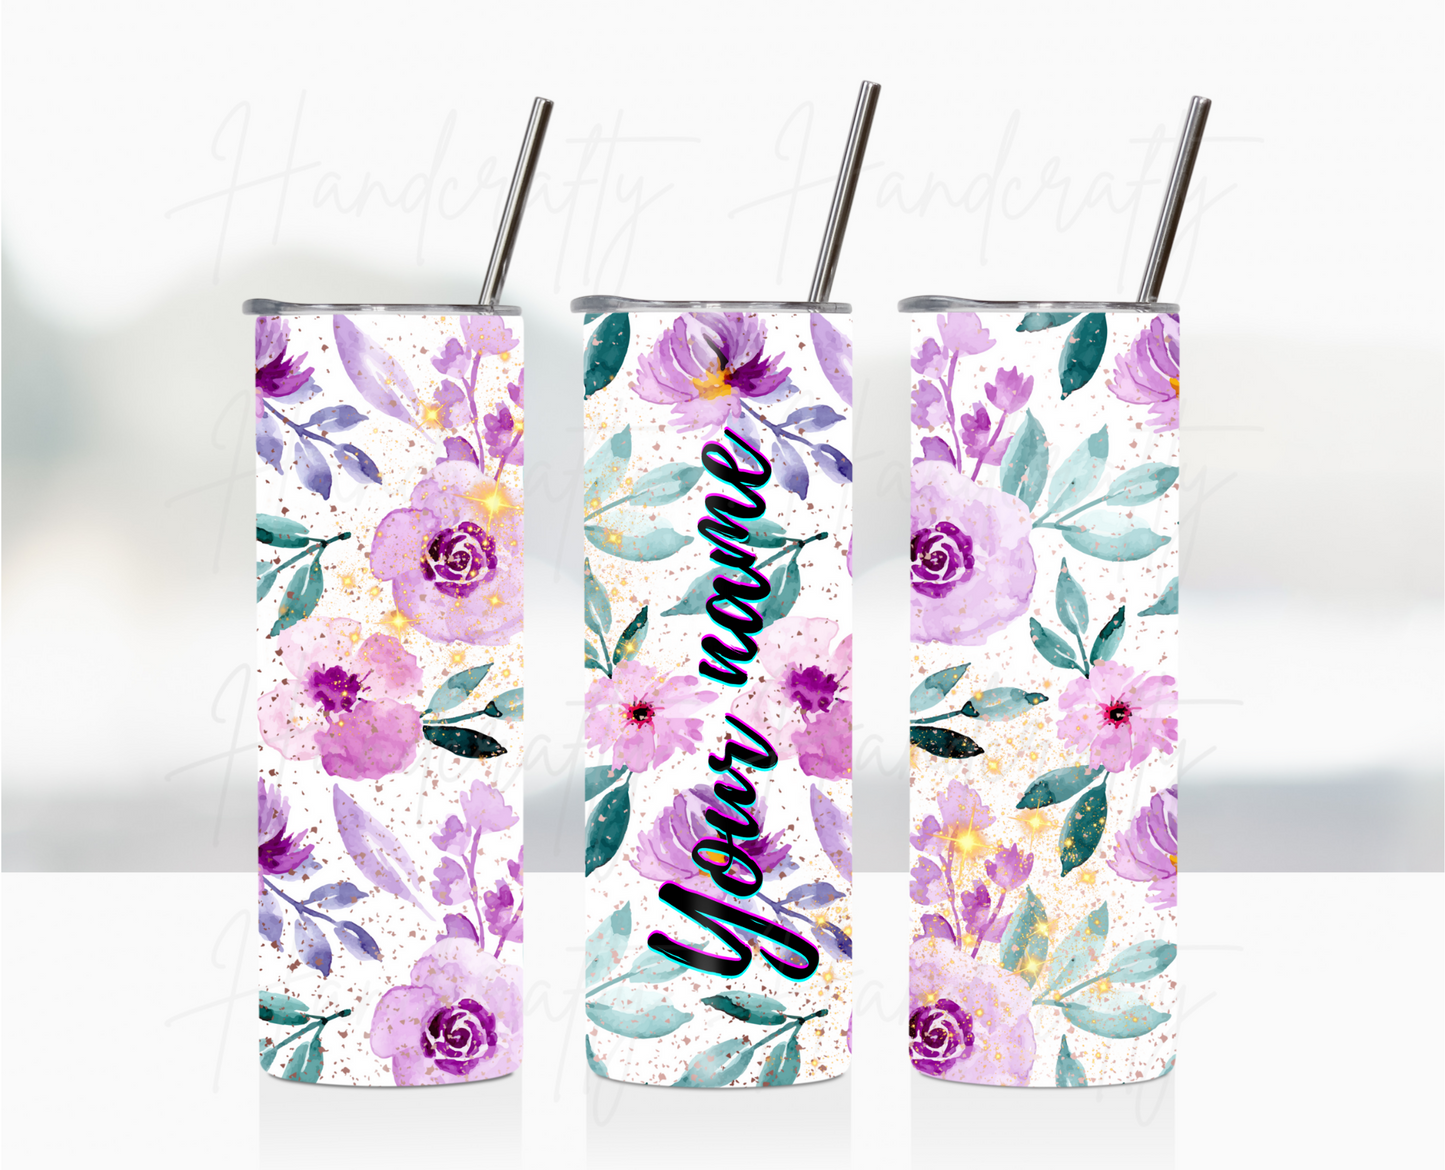 Purple watercolor flowers customizable tumbler, laser engraved customized tumbler, personalized stainless steel tumbler.